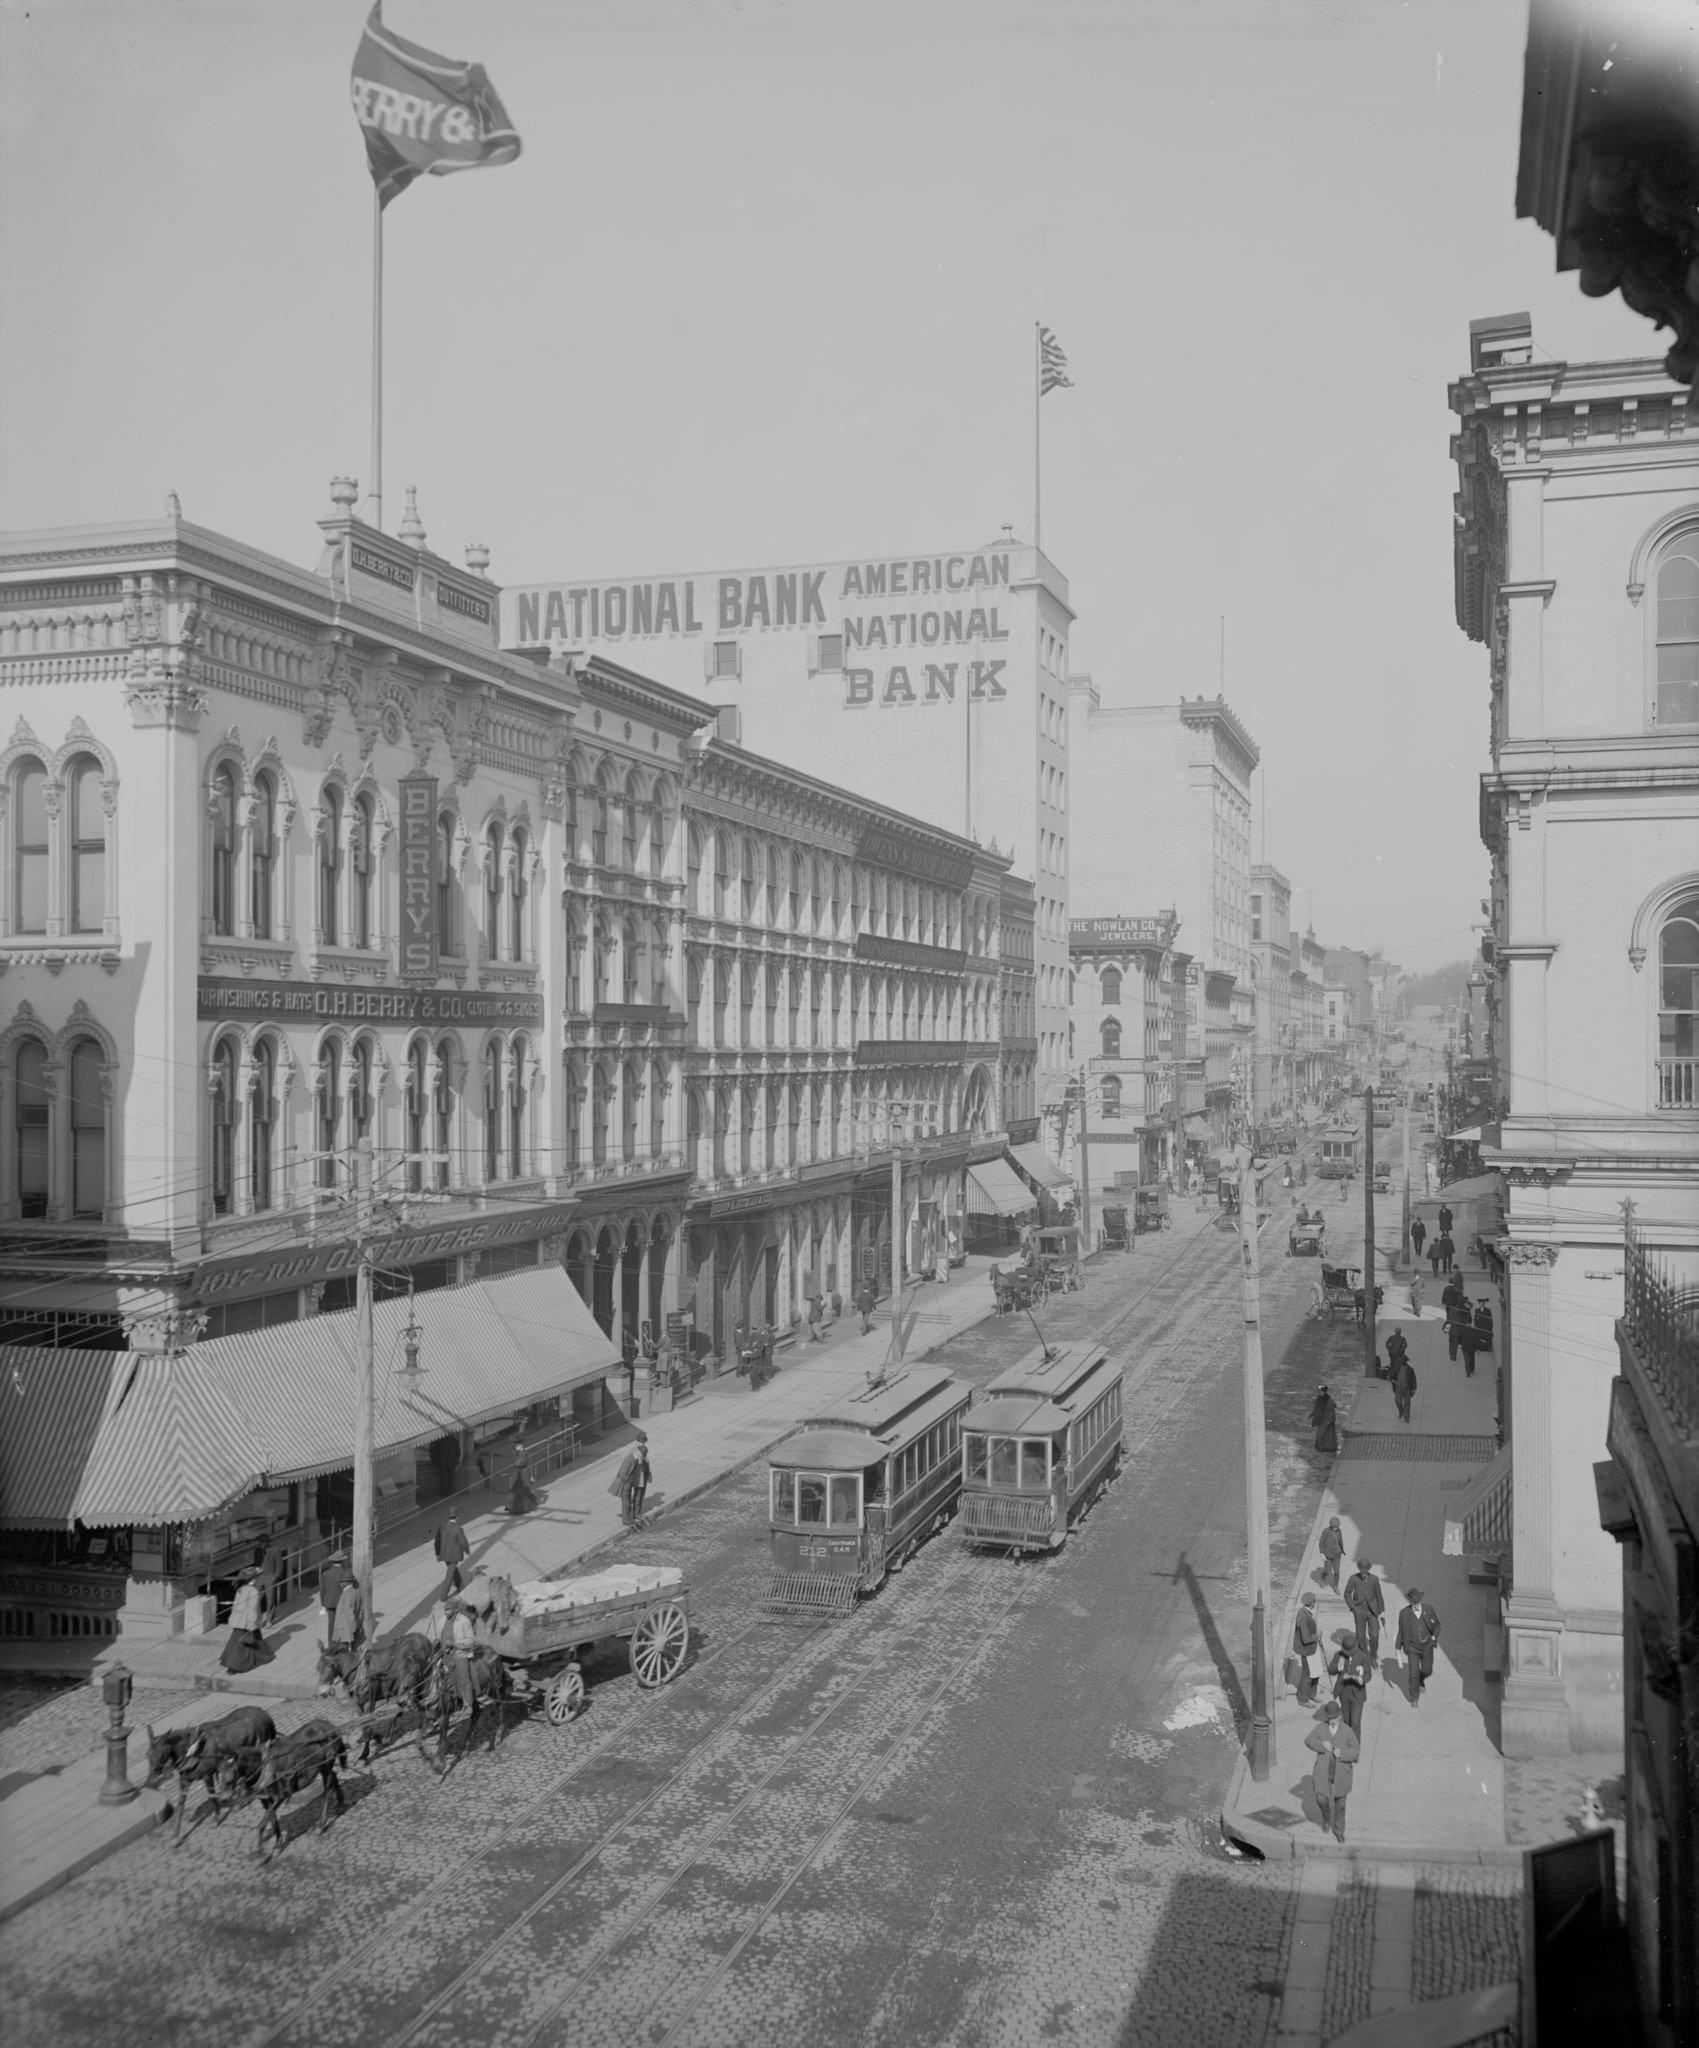 Main Street in Richmond, Virginia before the age of Bank Bailouts. Public Transportation Dominates the street with very little vehicular traffic besides. Many of the Buildings are cast iron, 1900